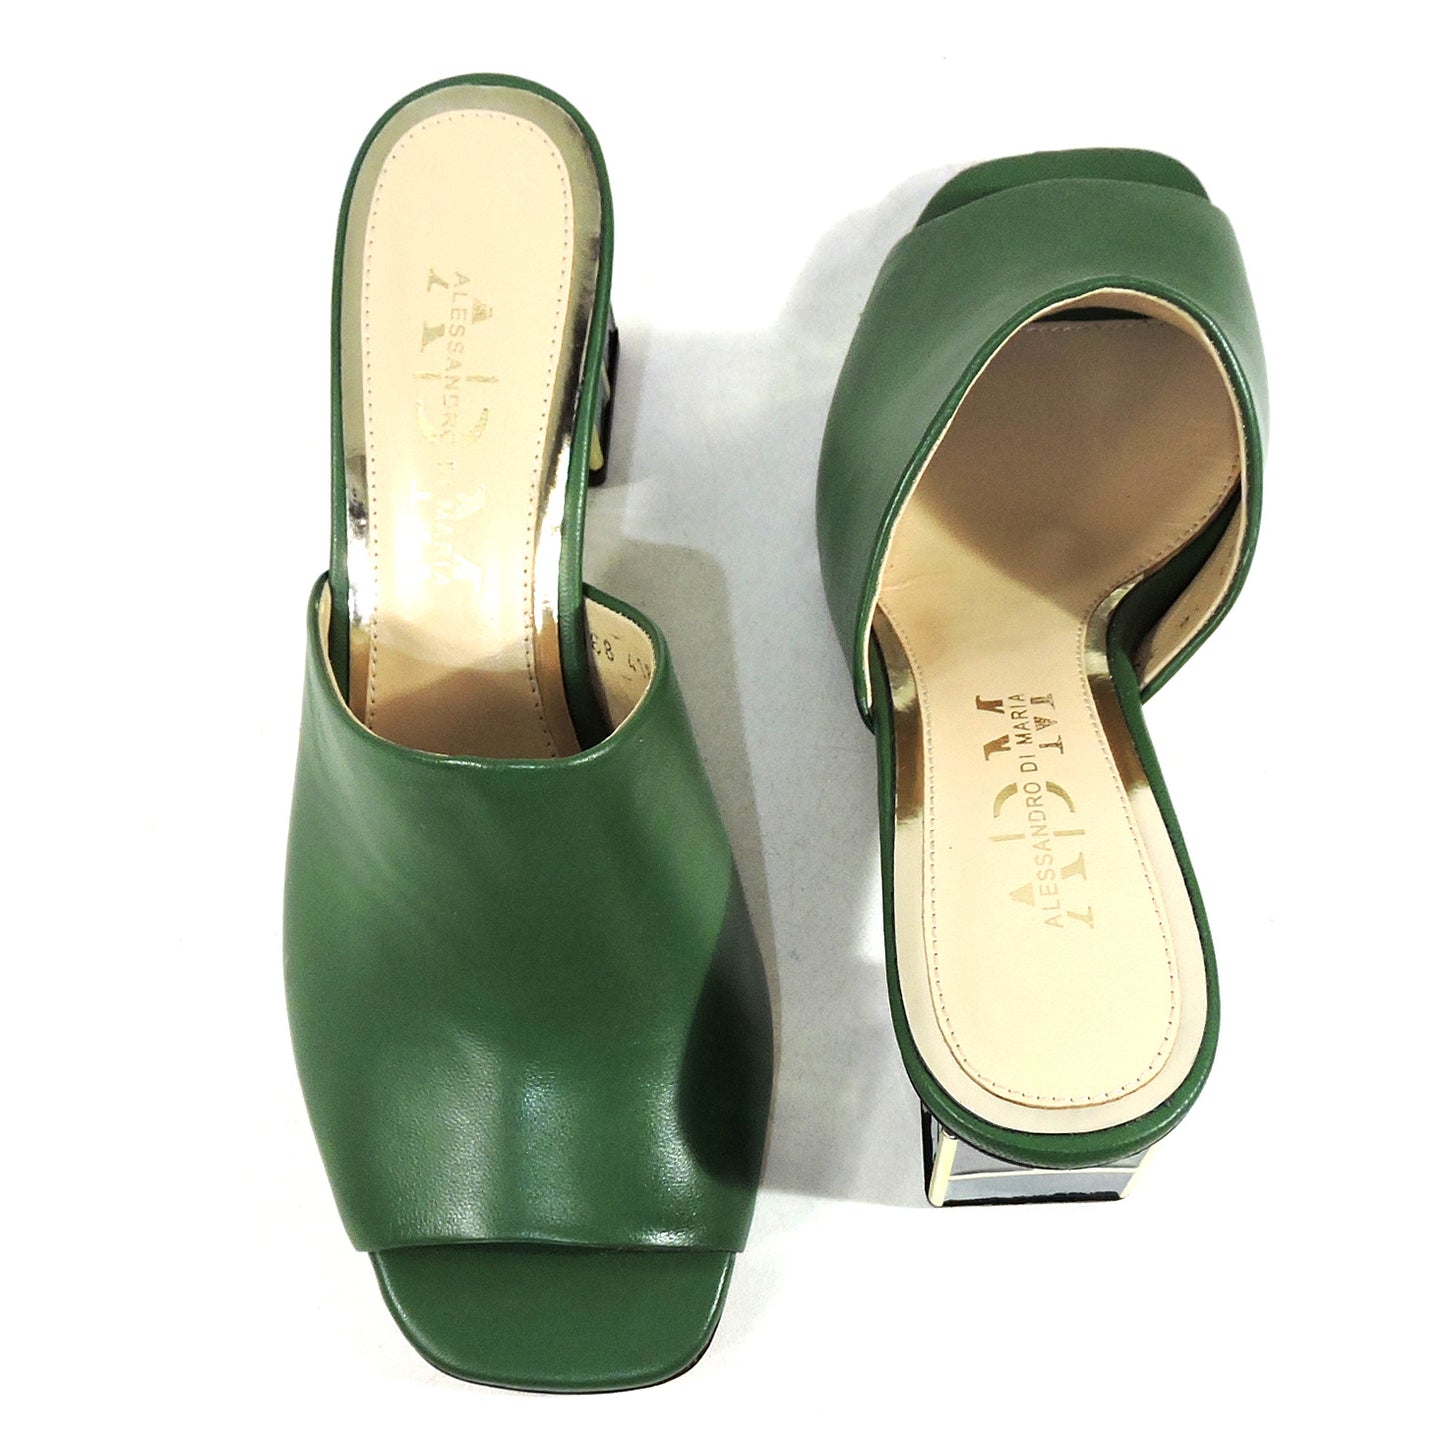 ALESSANDRO DI MARIA 🇮🇹 WOMEN'S GREEN SOFT LEATHER SUMMER MULES